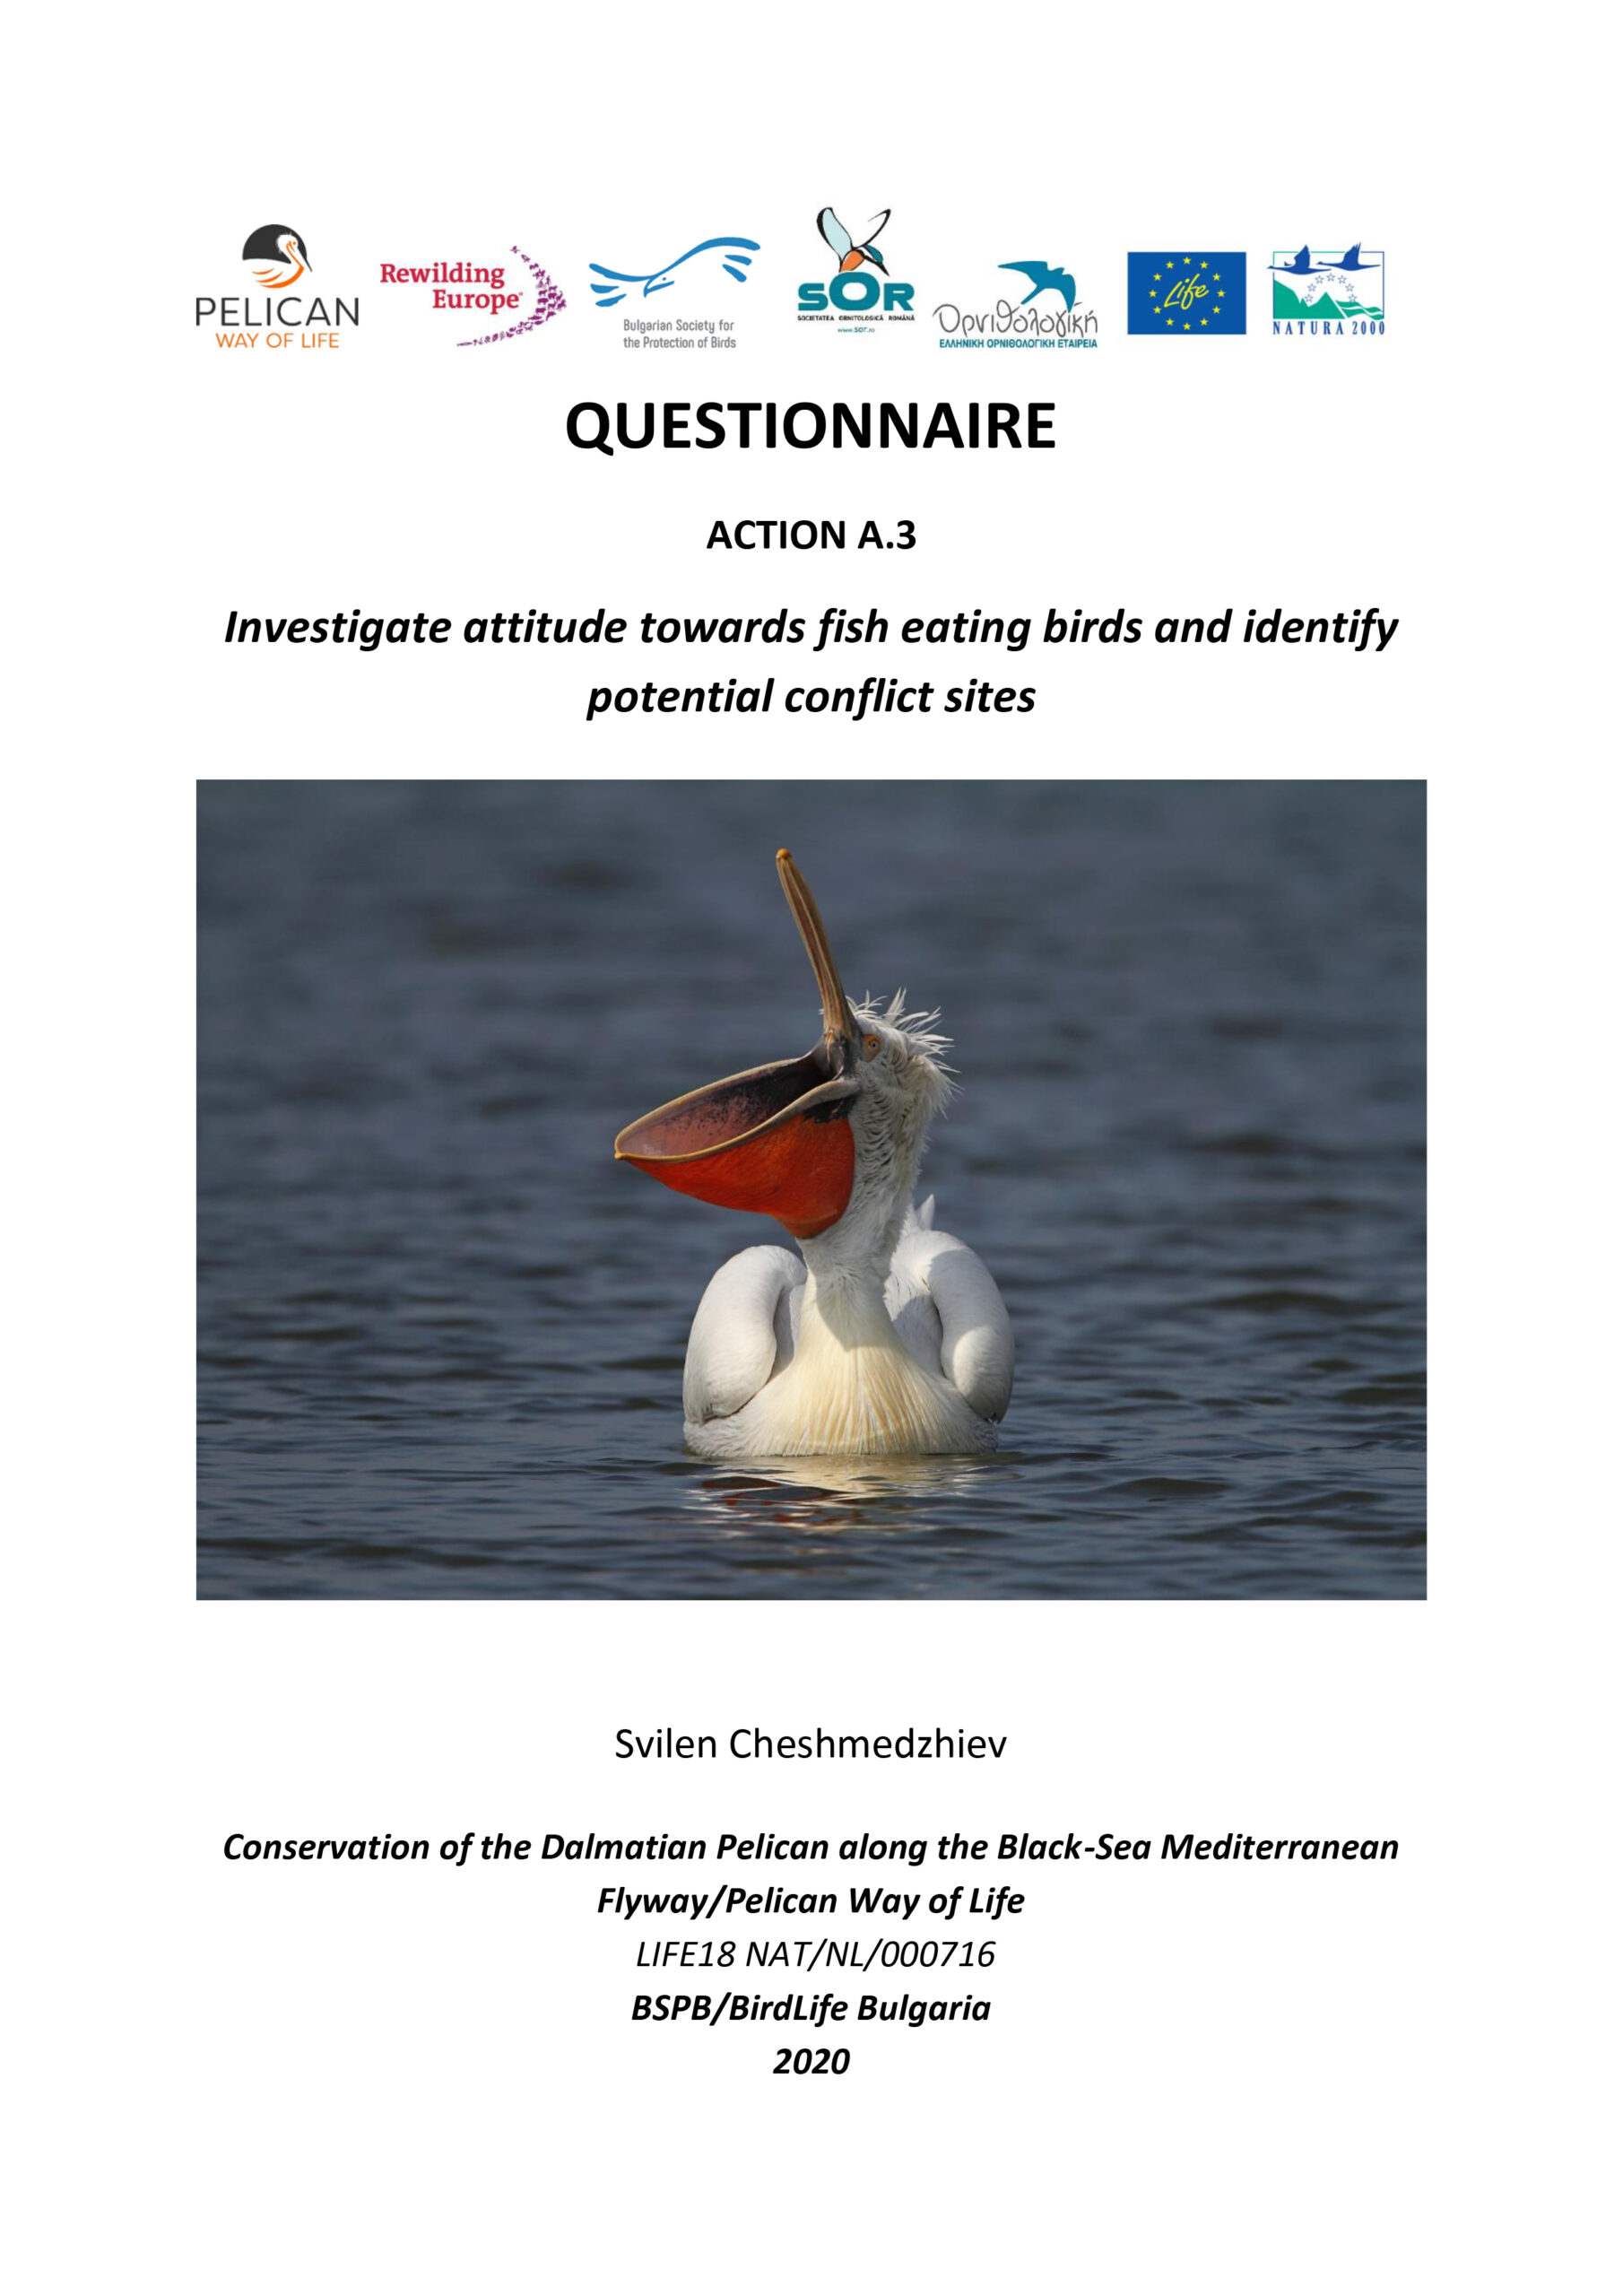 Questionnaire “Investigate attitude towards fish eating birds and identify potential conflict sites”